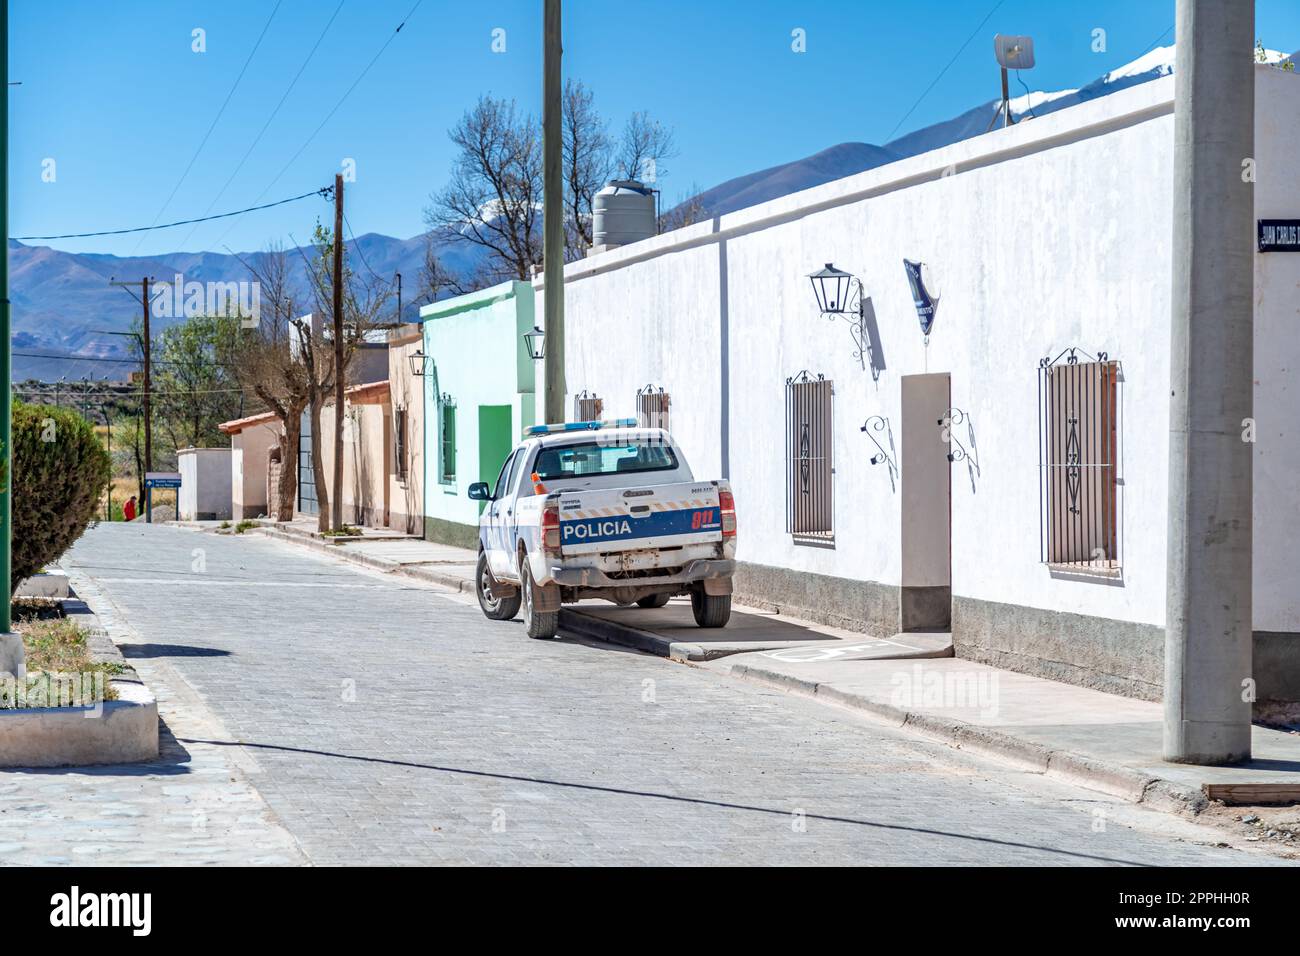 La Poma, Argentina - April 11, 2022: SUV at a police station in a mountain village in the Andes of South America Stock Photo